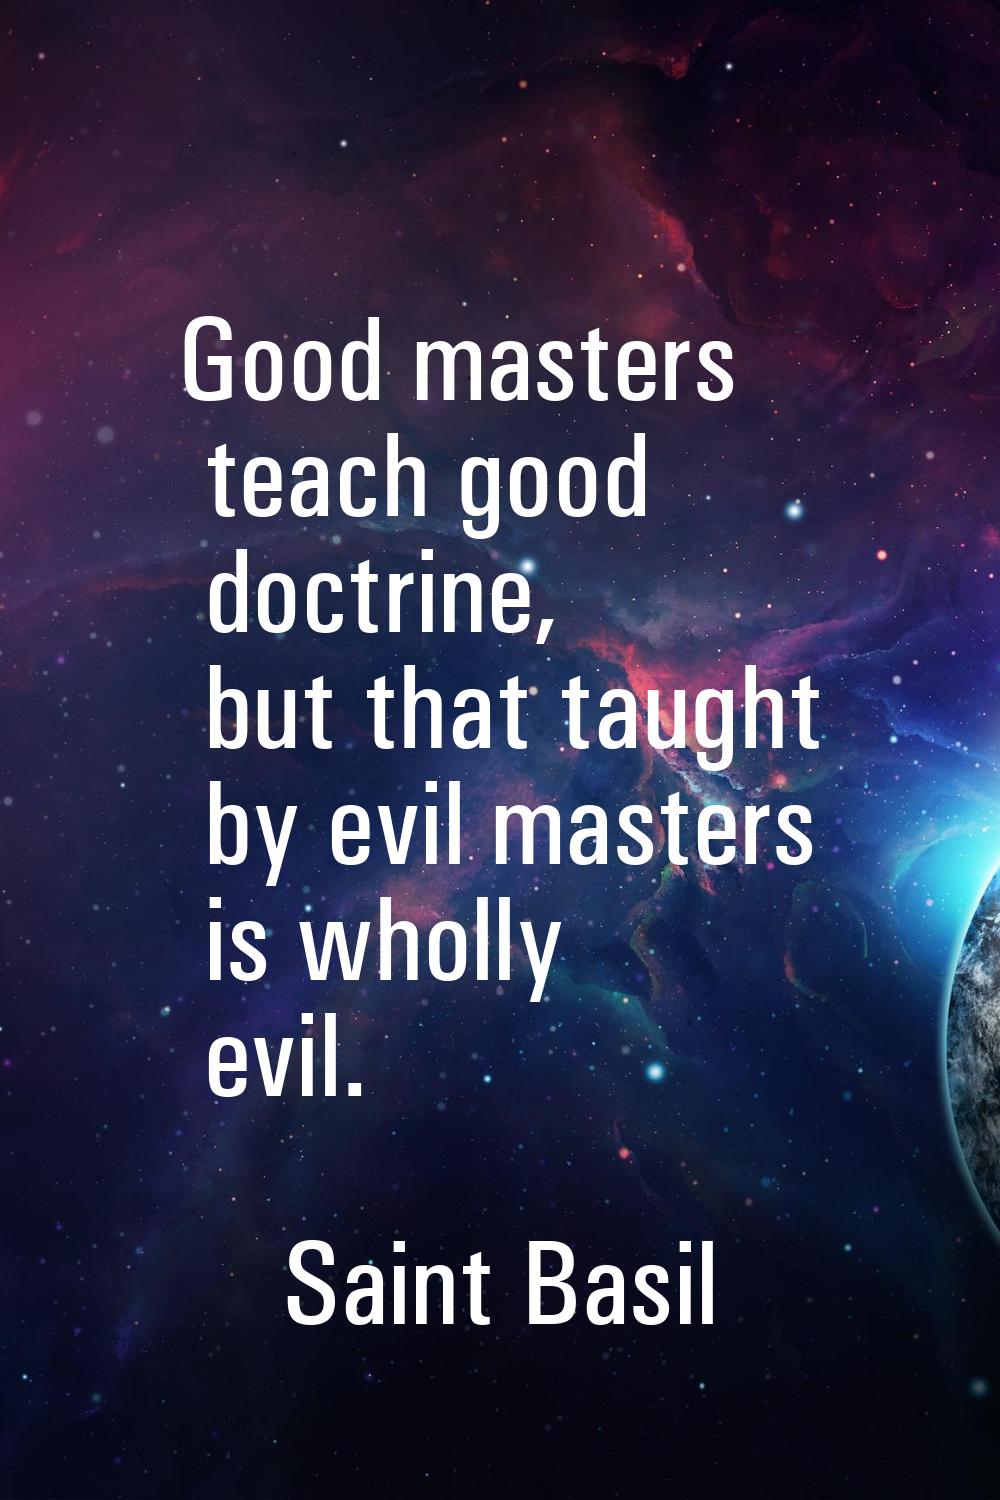 Good masters teach good doctrine, but that taught by evil masters is wholly evil.